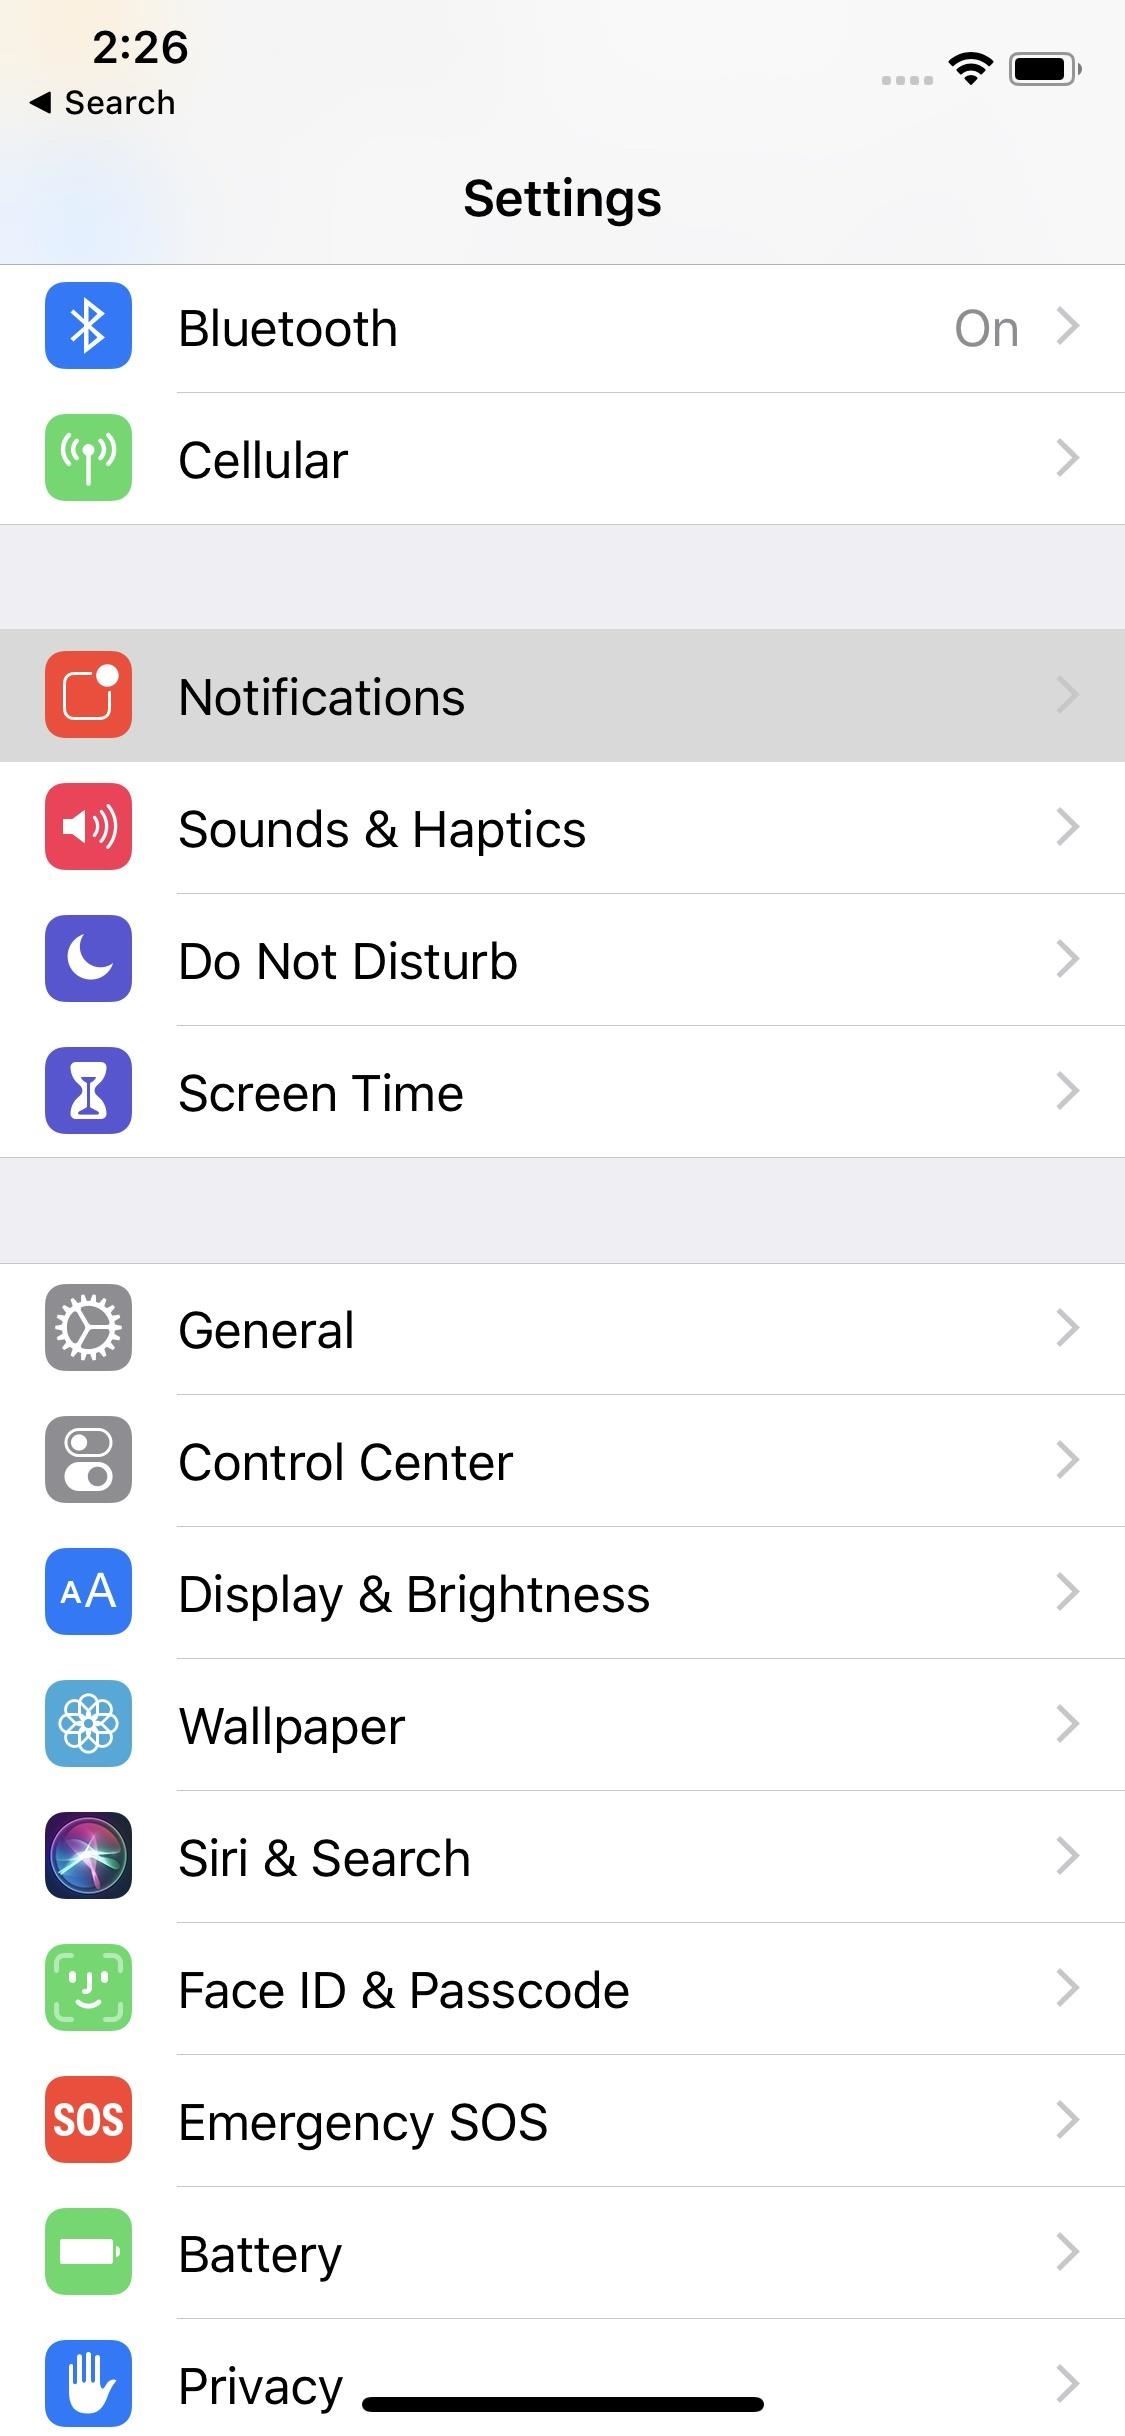 How to Set Persistent Notifications for Apps on Your iPhone